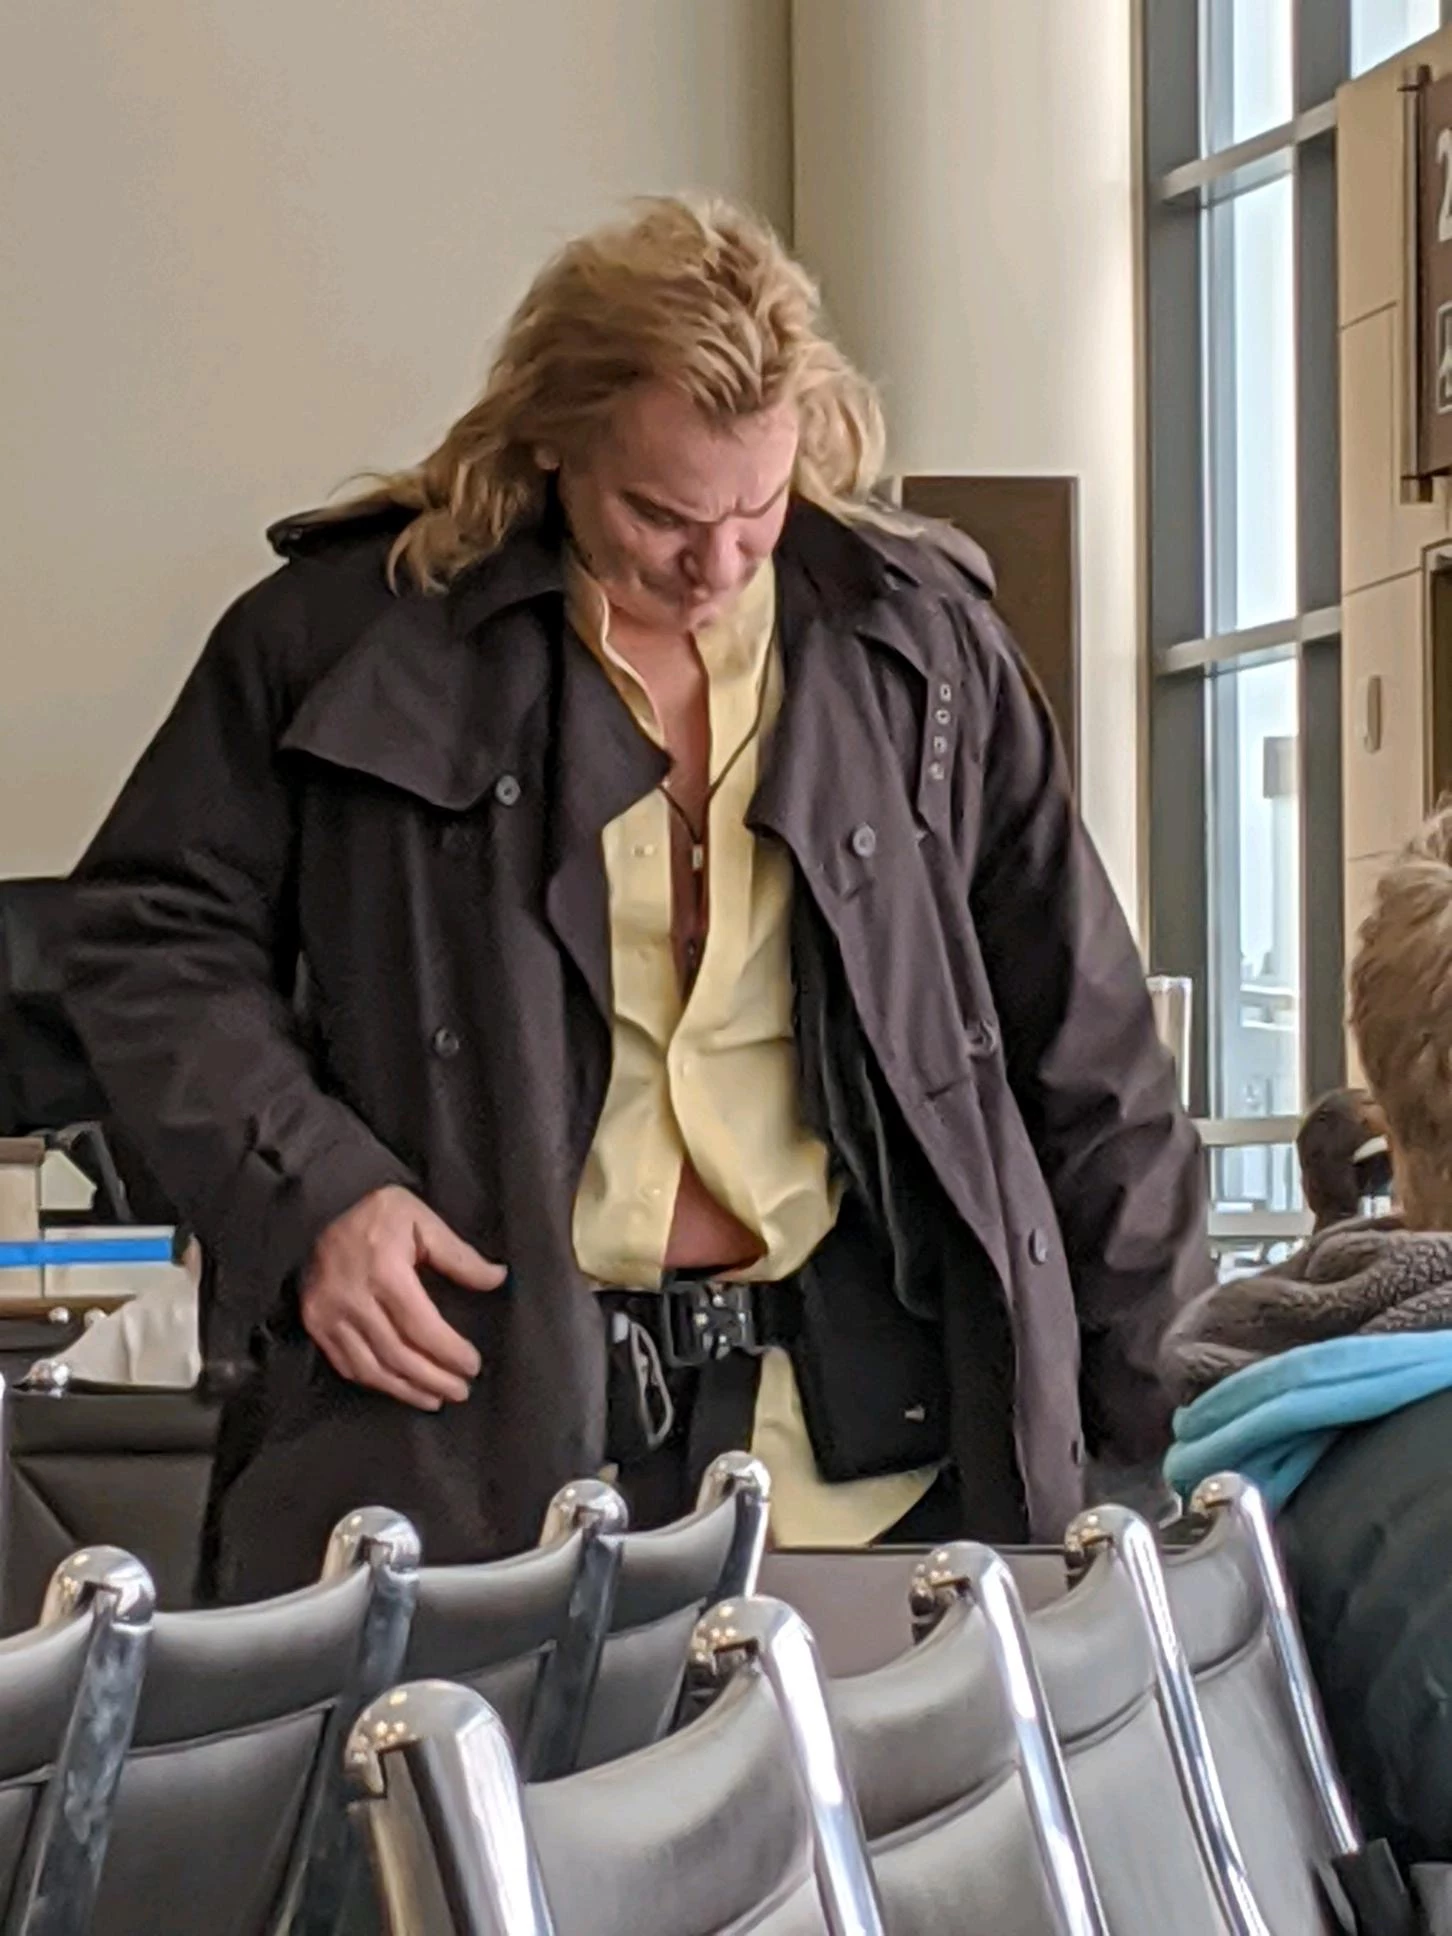 Evan Stone Porn Stars - Famous Porn Star Spotted At Kalamazoo Airport Sunday